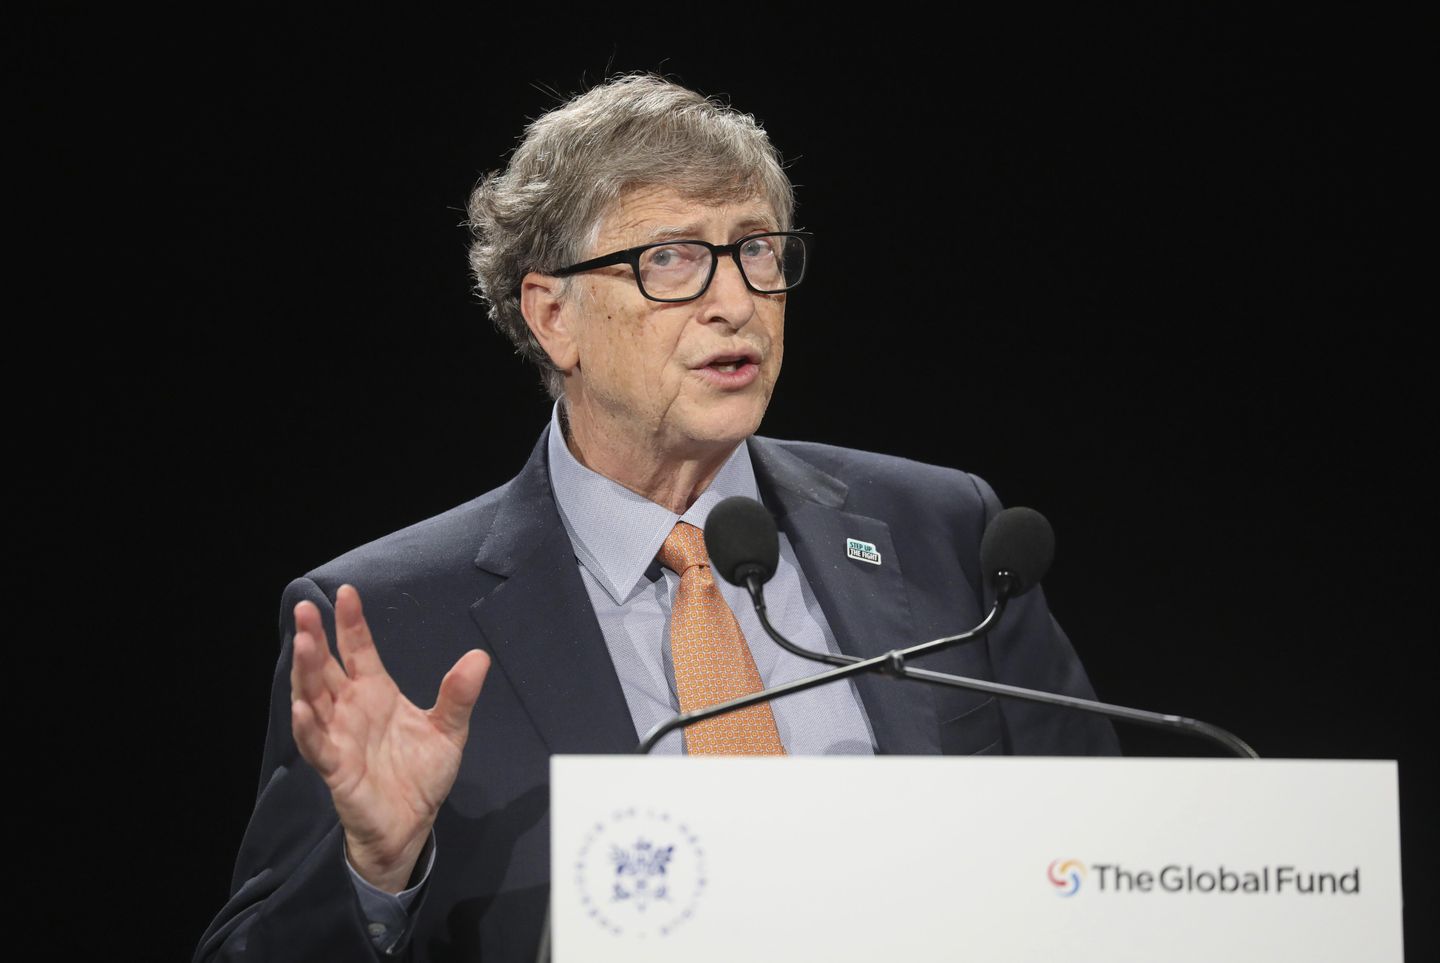 Microsoft co-founder Bill Gates says he has COVID